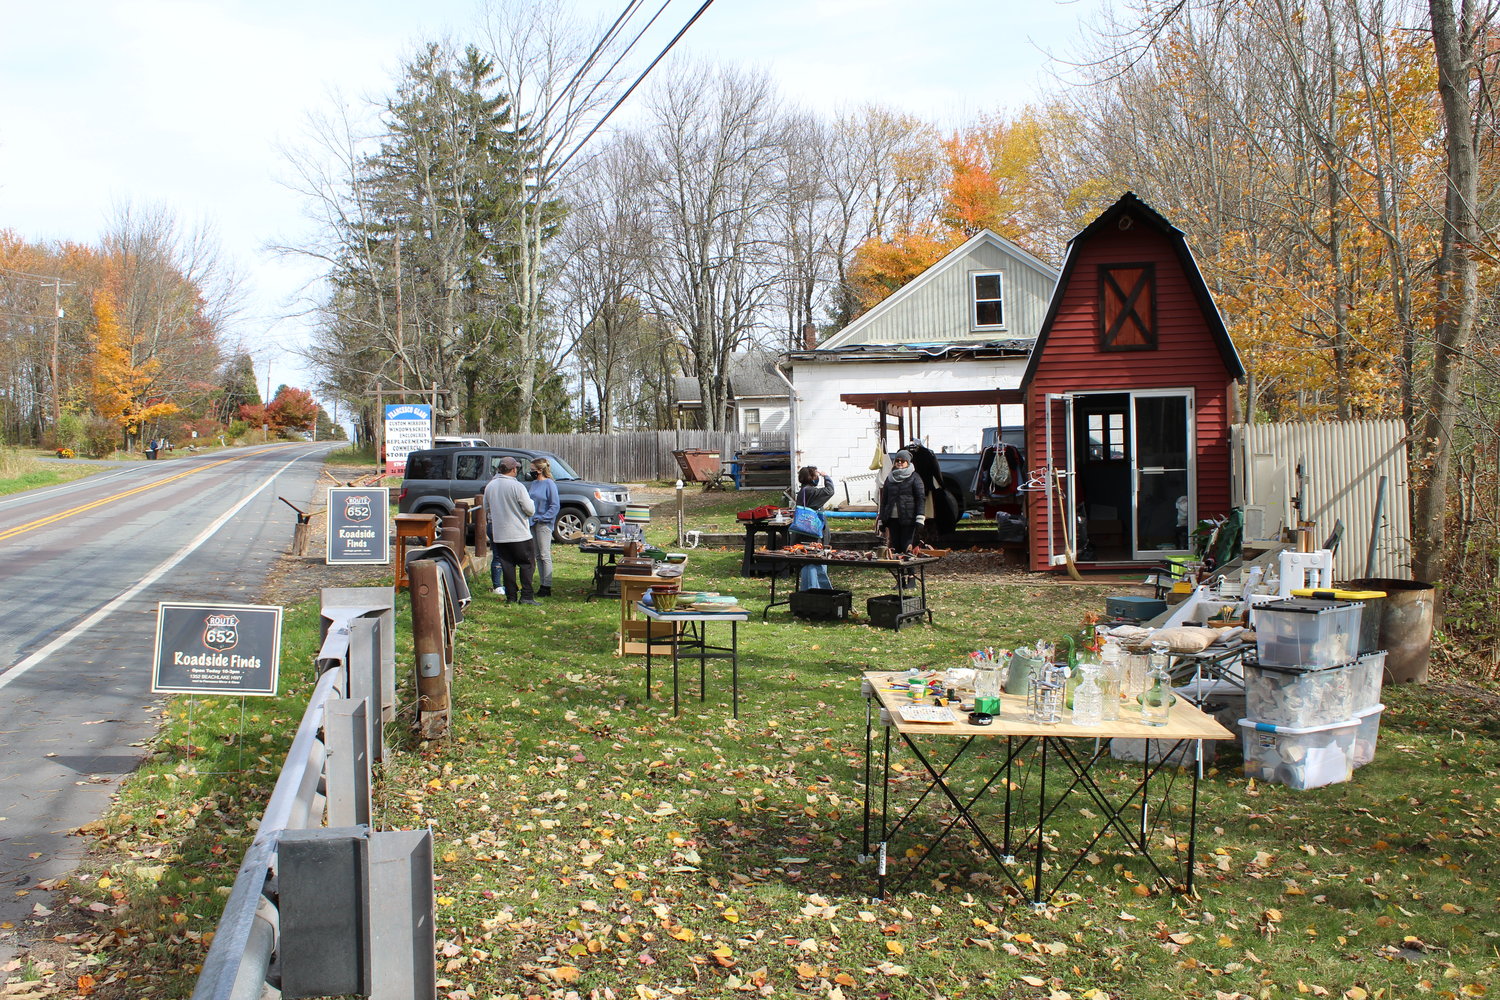 A recent Sunday at Route 652 Roadside Finds. The pop-up shop in Beach Lake, PA sells items from tools to vintage clothing—including coats!